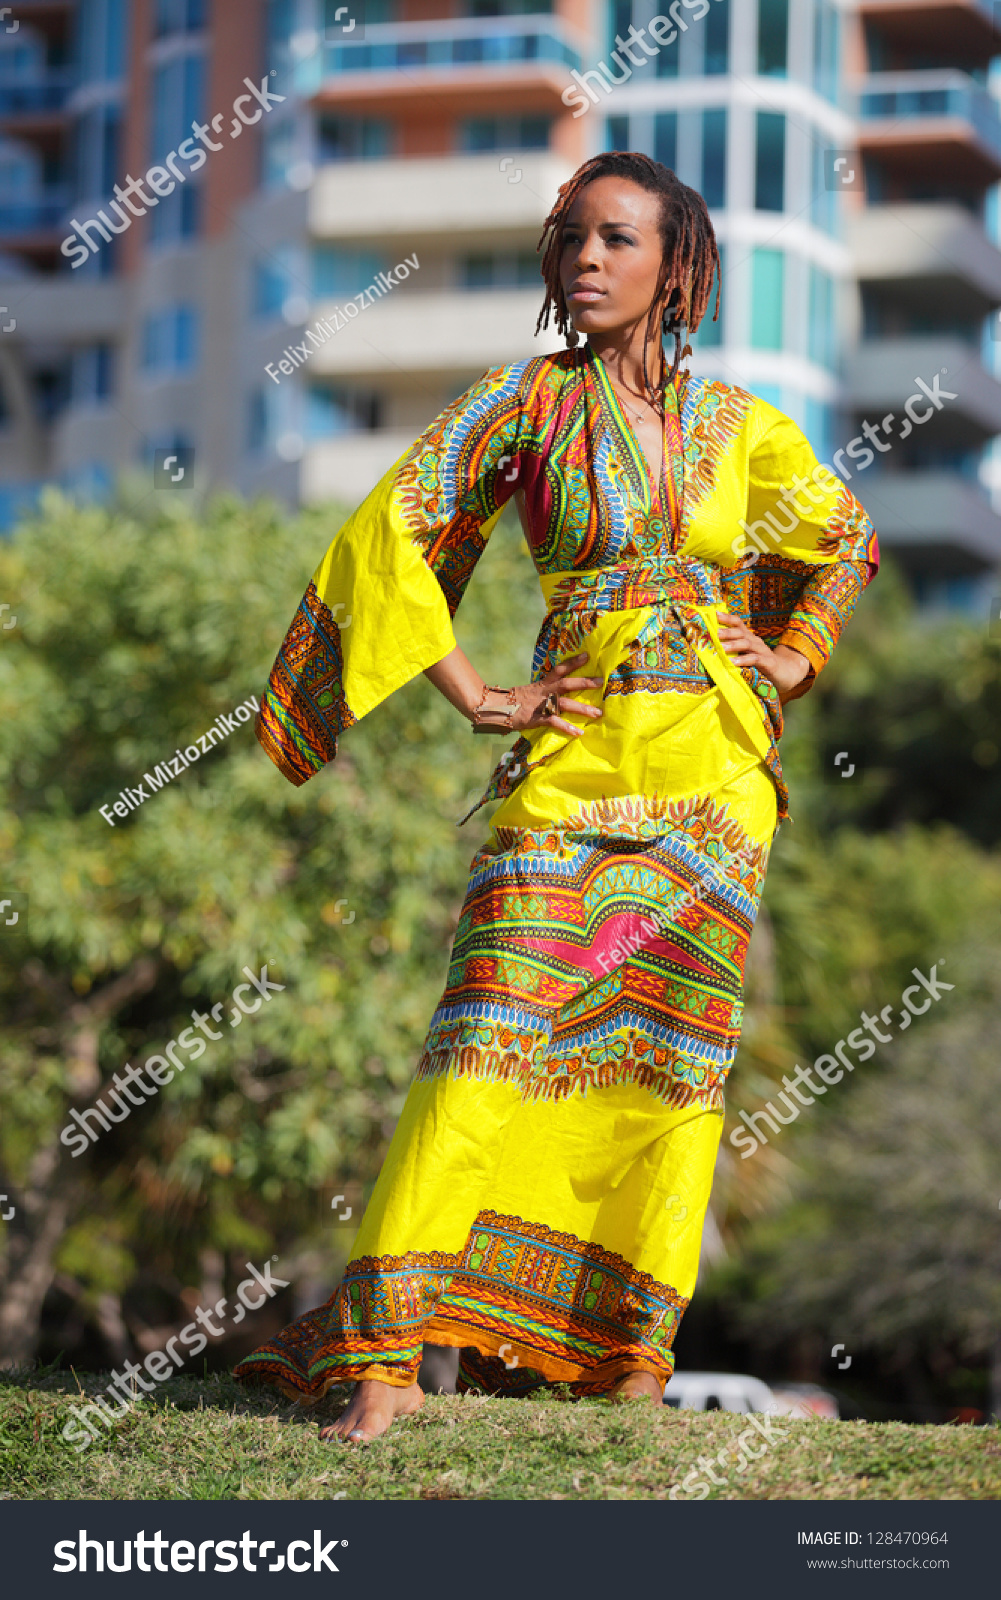 Stock Image African American Woman ...